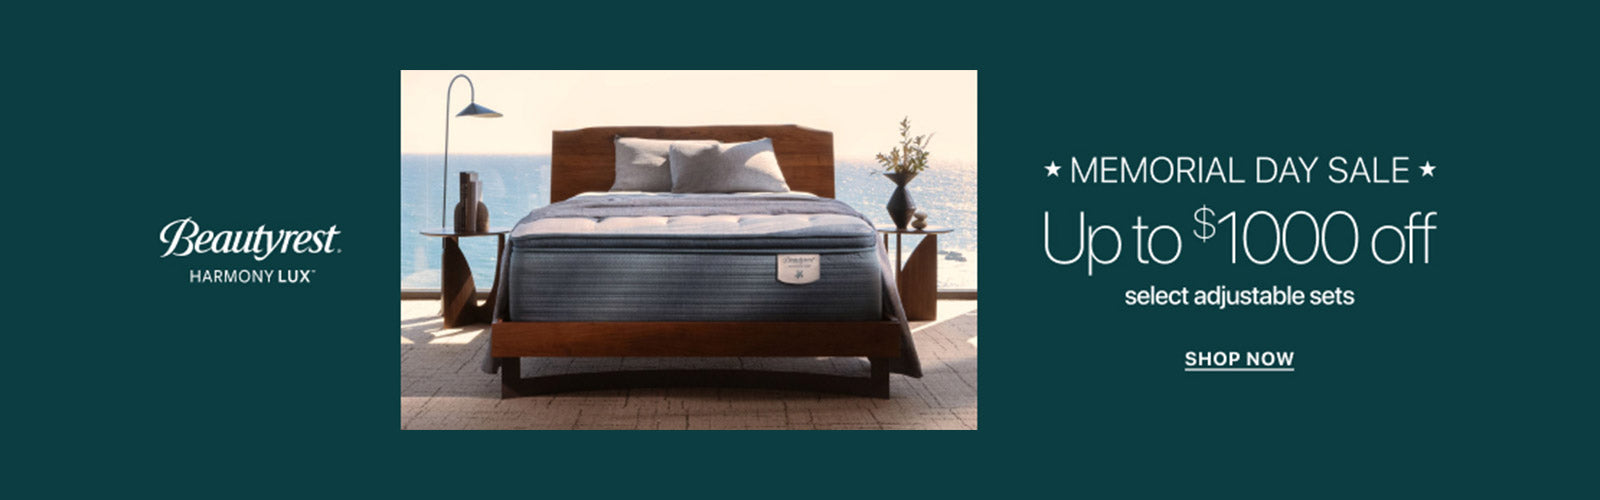 Beautyrest Memorial Day Sale- Save up to $1,000 on select Harmony Lux adjustabel sets